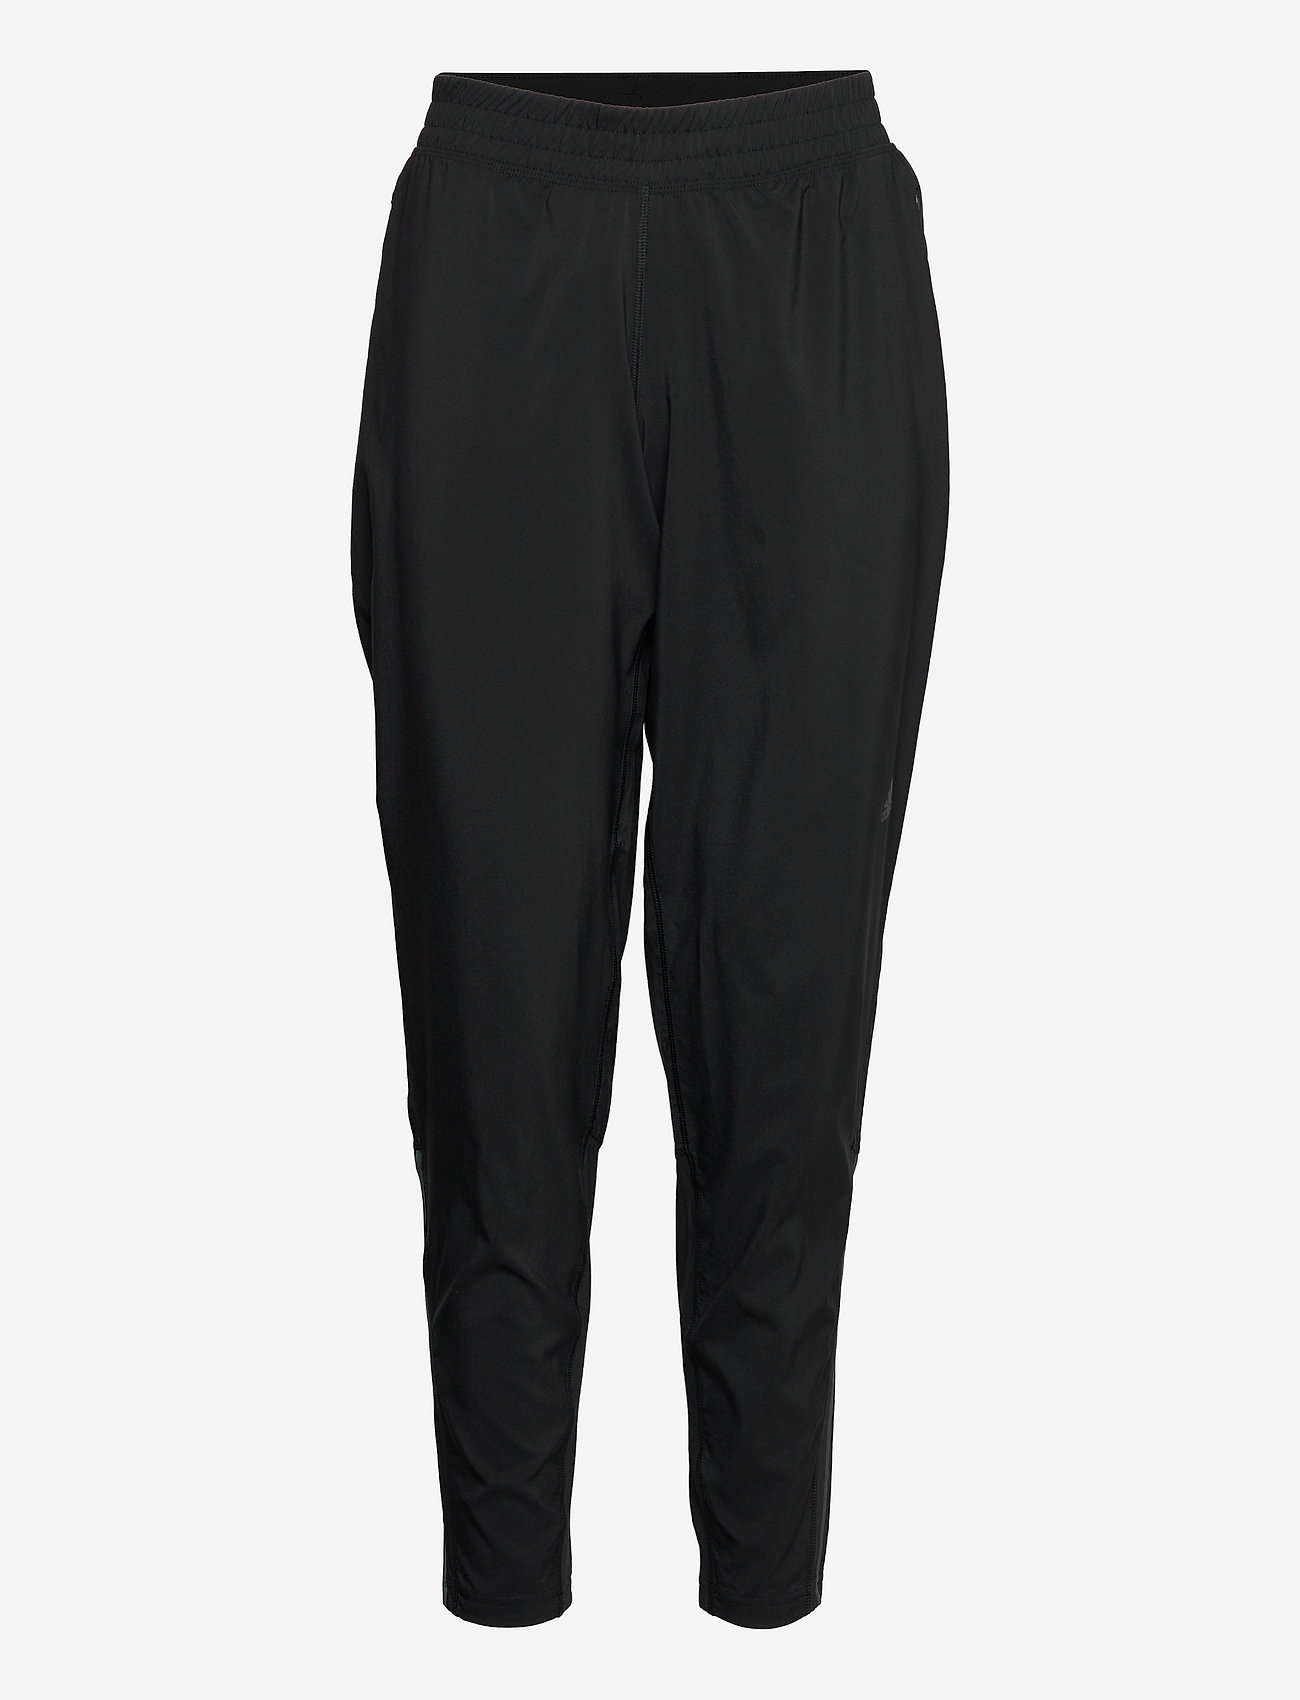 adidas Performance Run Icons 3-stripes Wind Running Pants W - Trousers ...